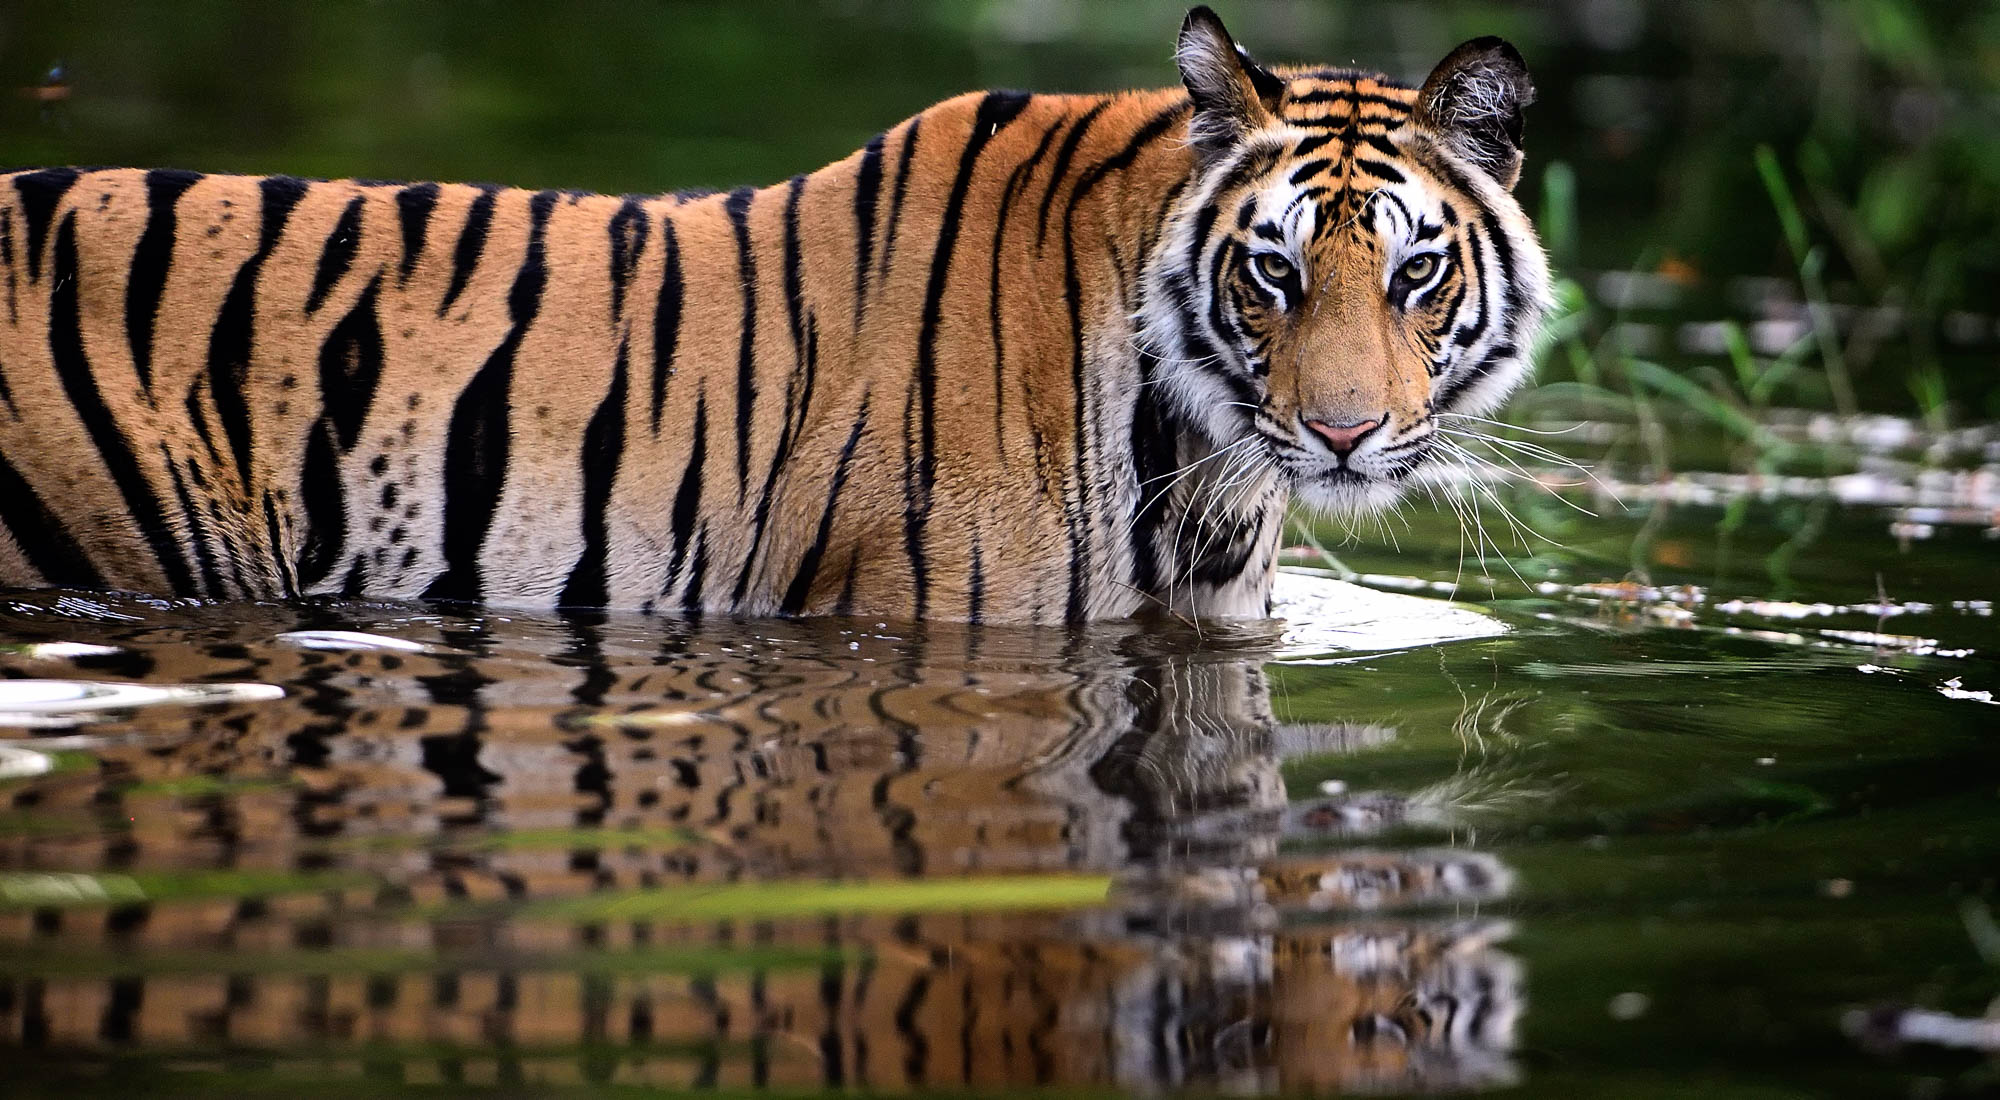 tiger water bandhavgarh talat hm2 - Checklist of the Best Places for Post-COVID Vacations in India